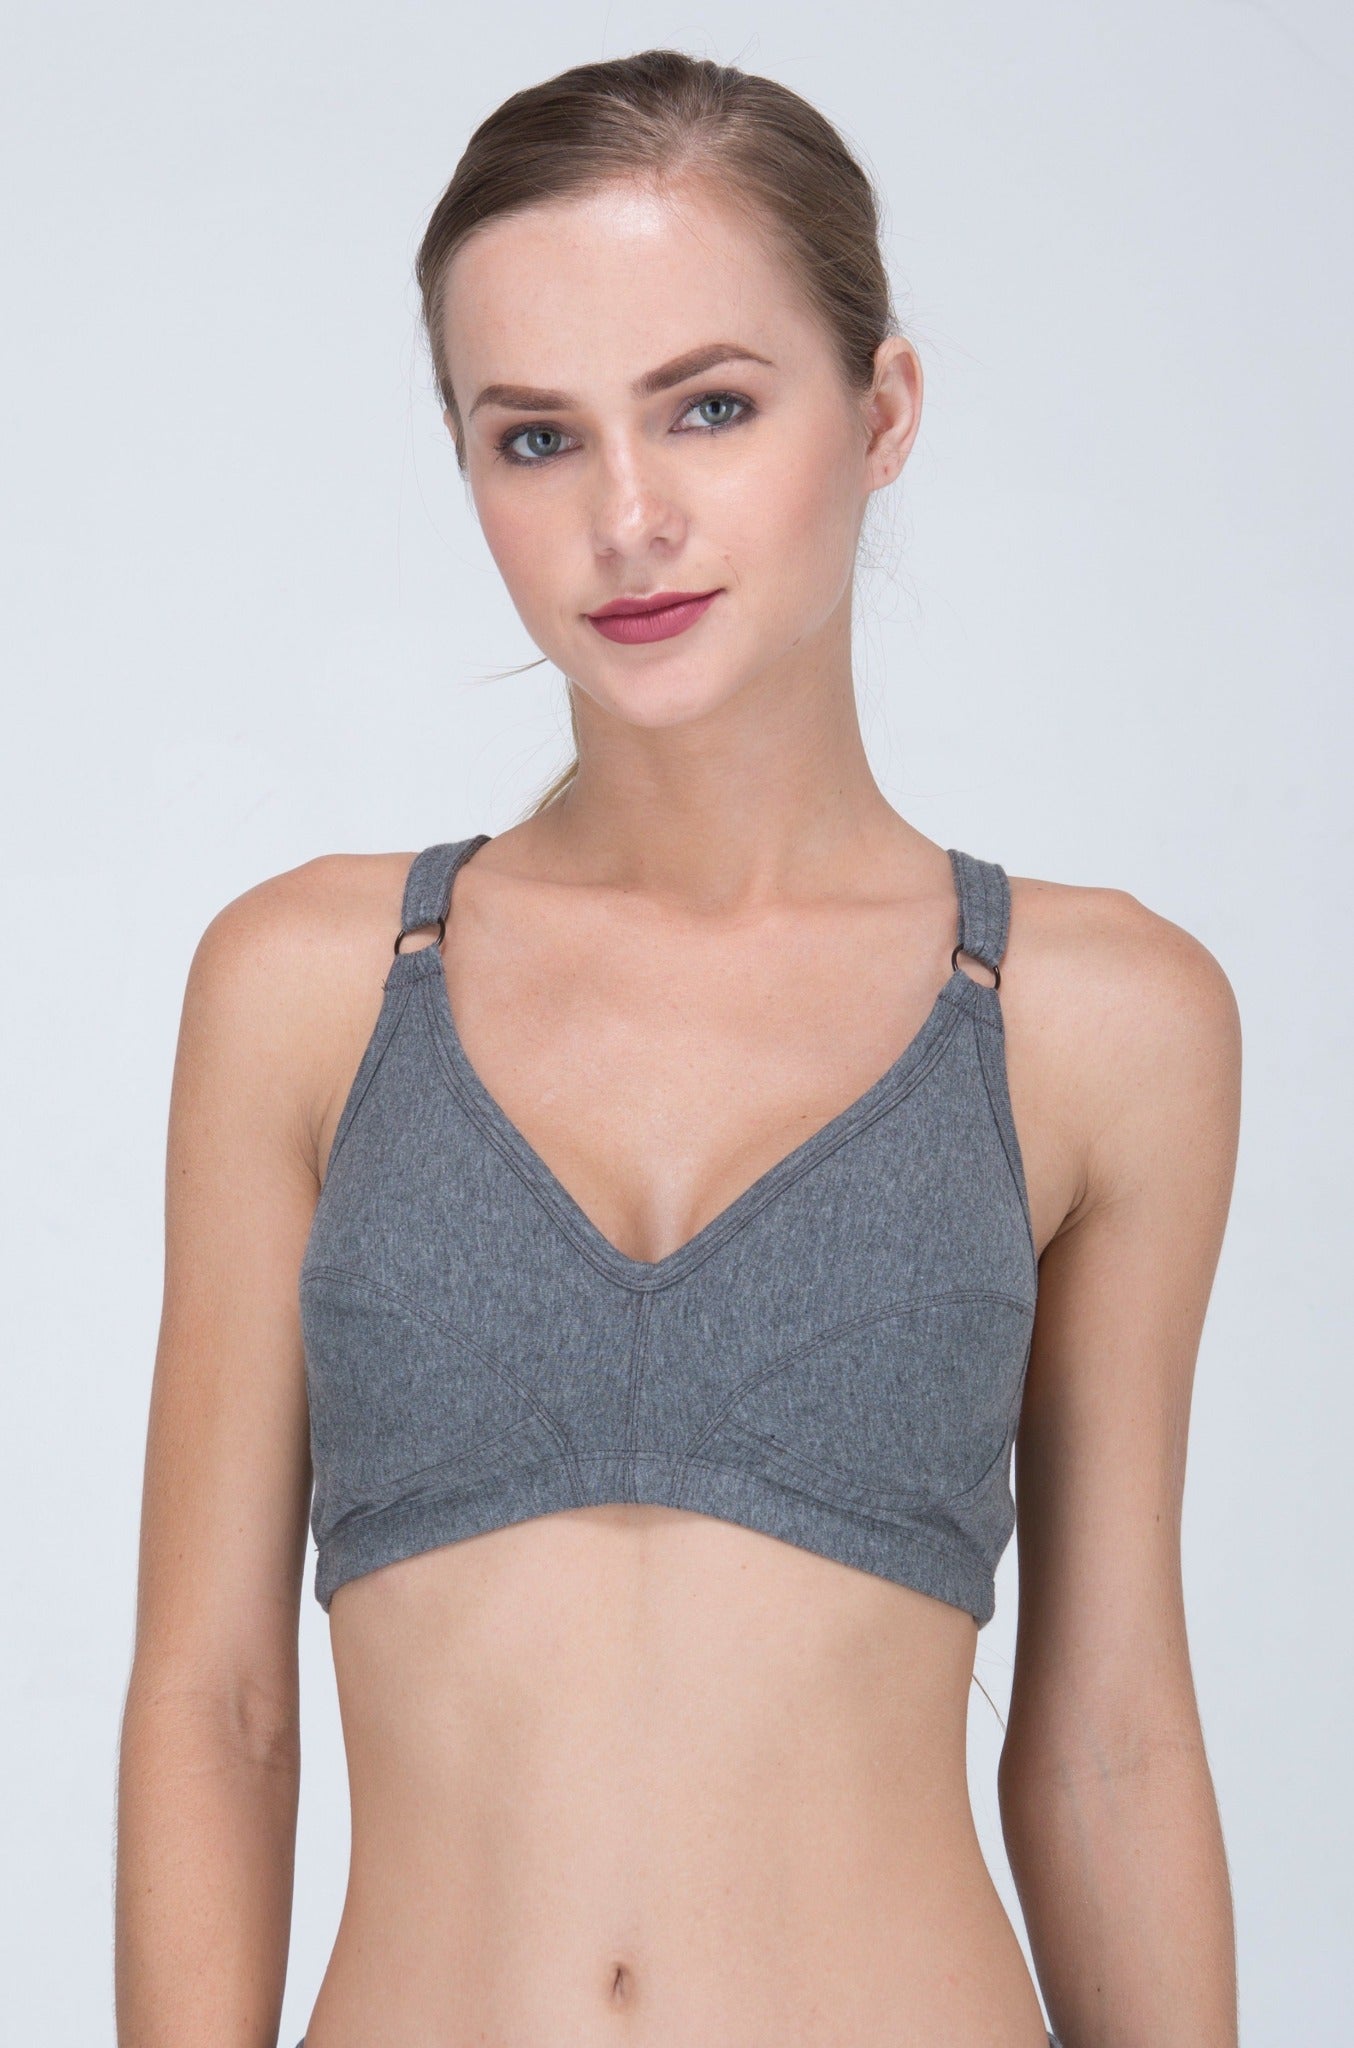 Pullover Bra, Shop The Largest Collection